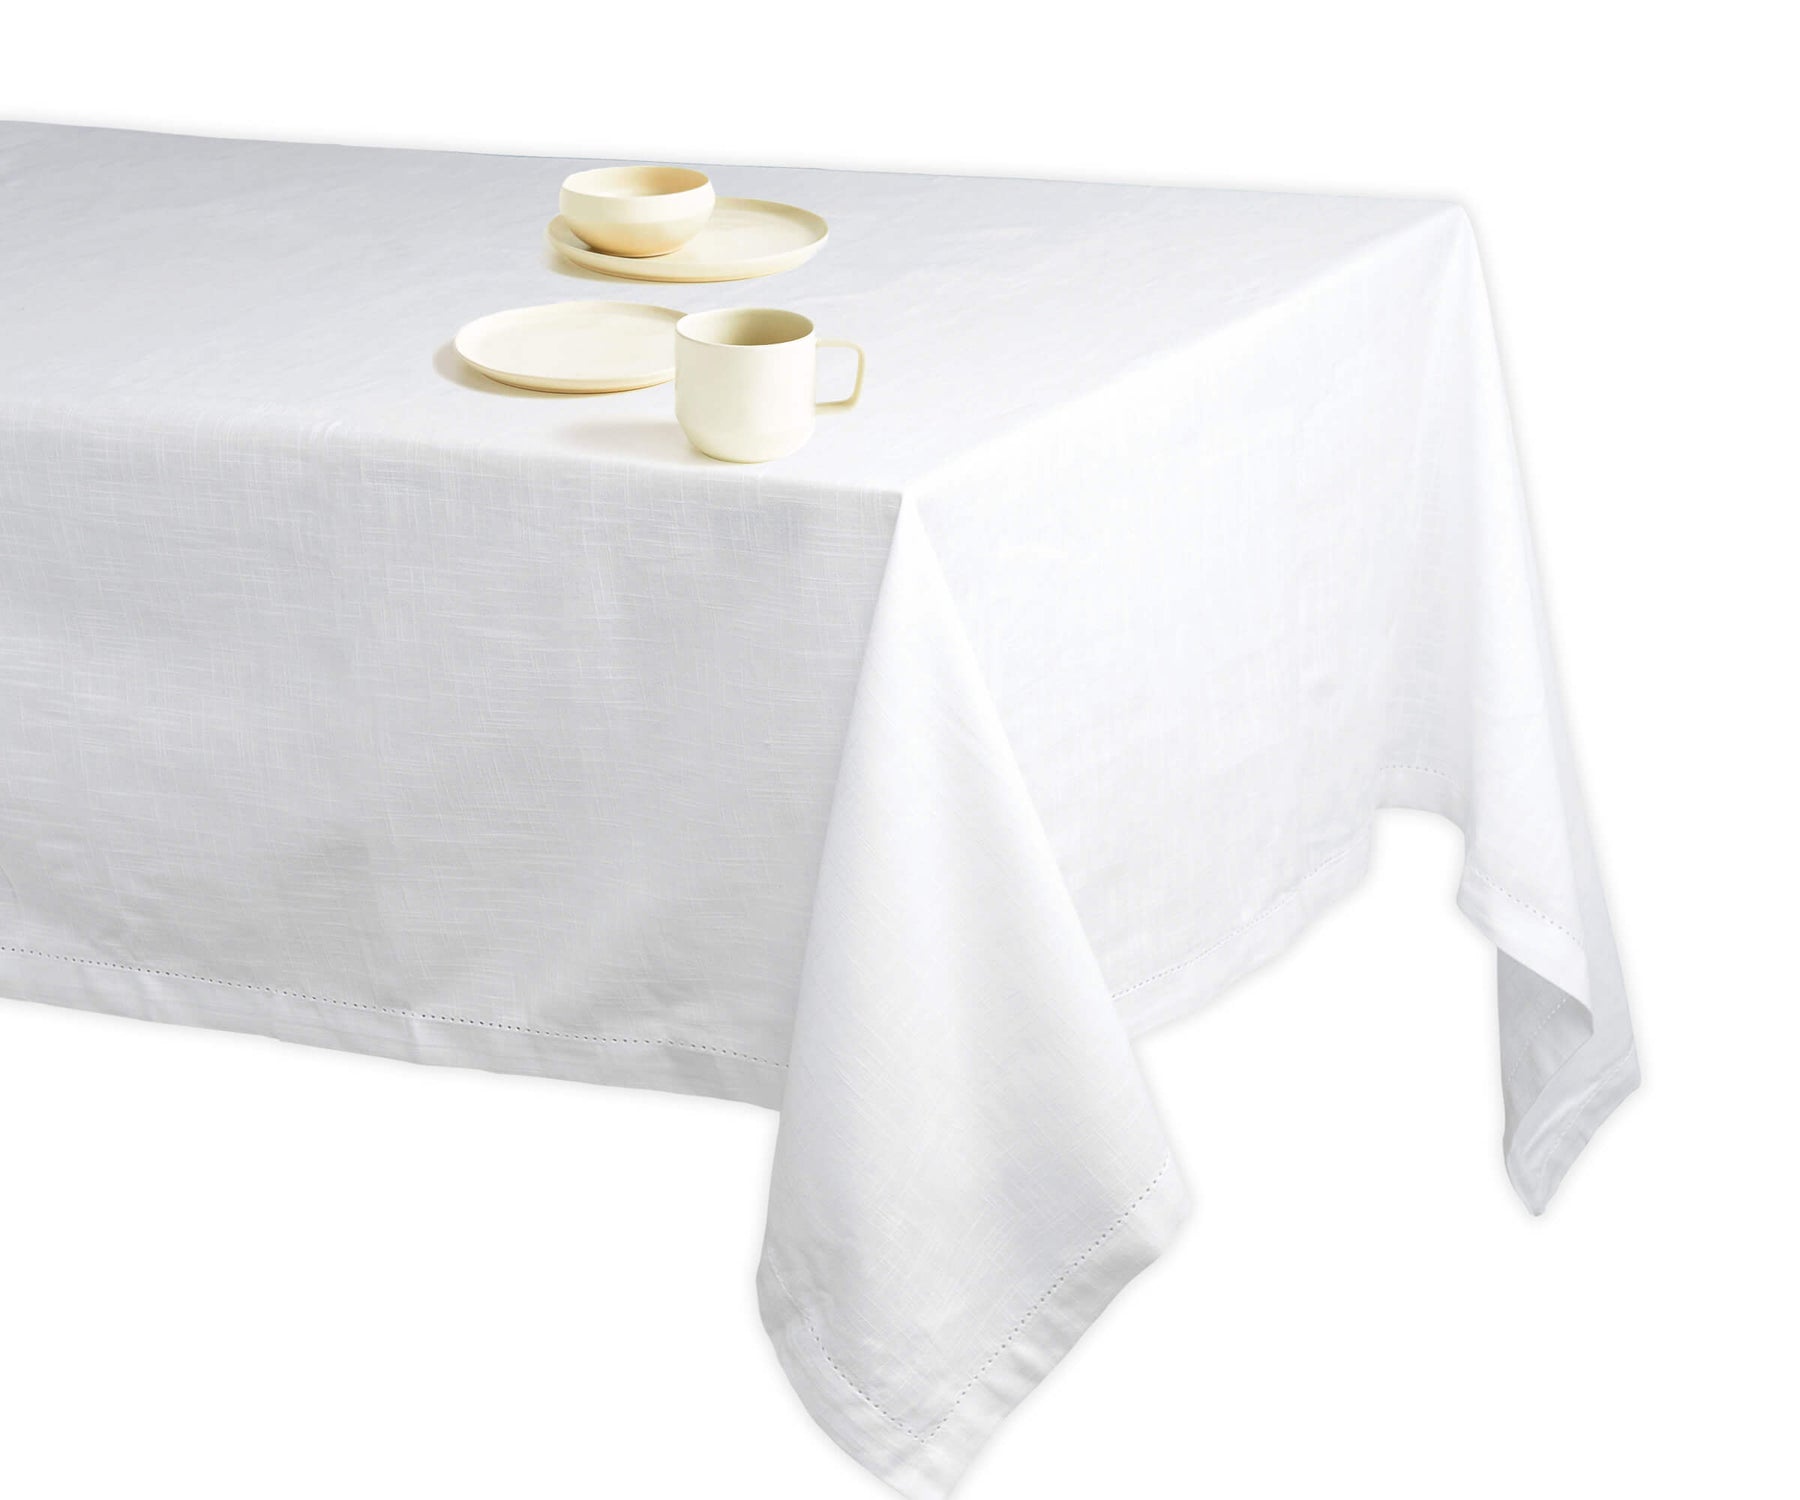 hemstitched tablecloth cotton hemstitch tablecloth